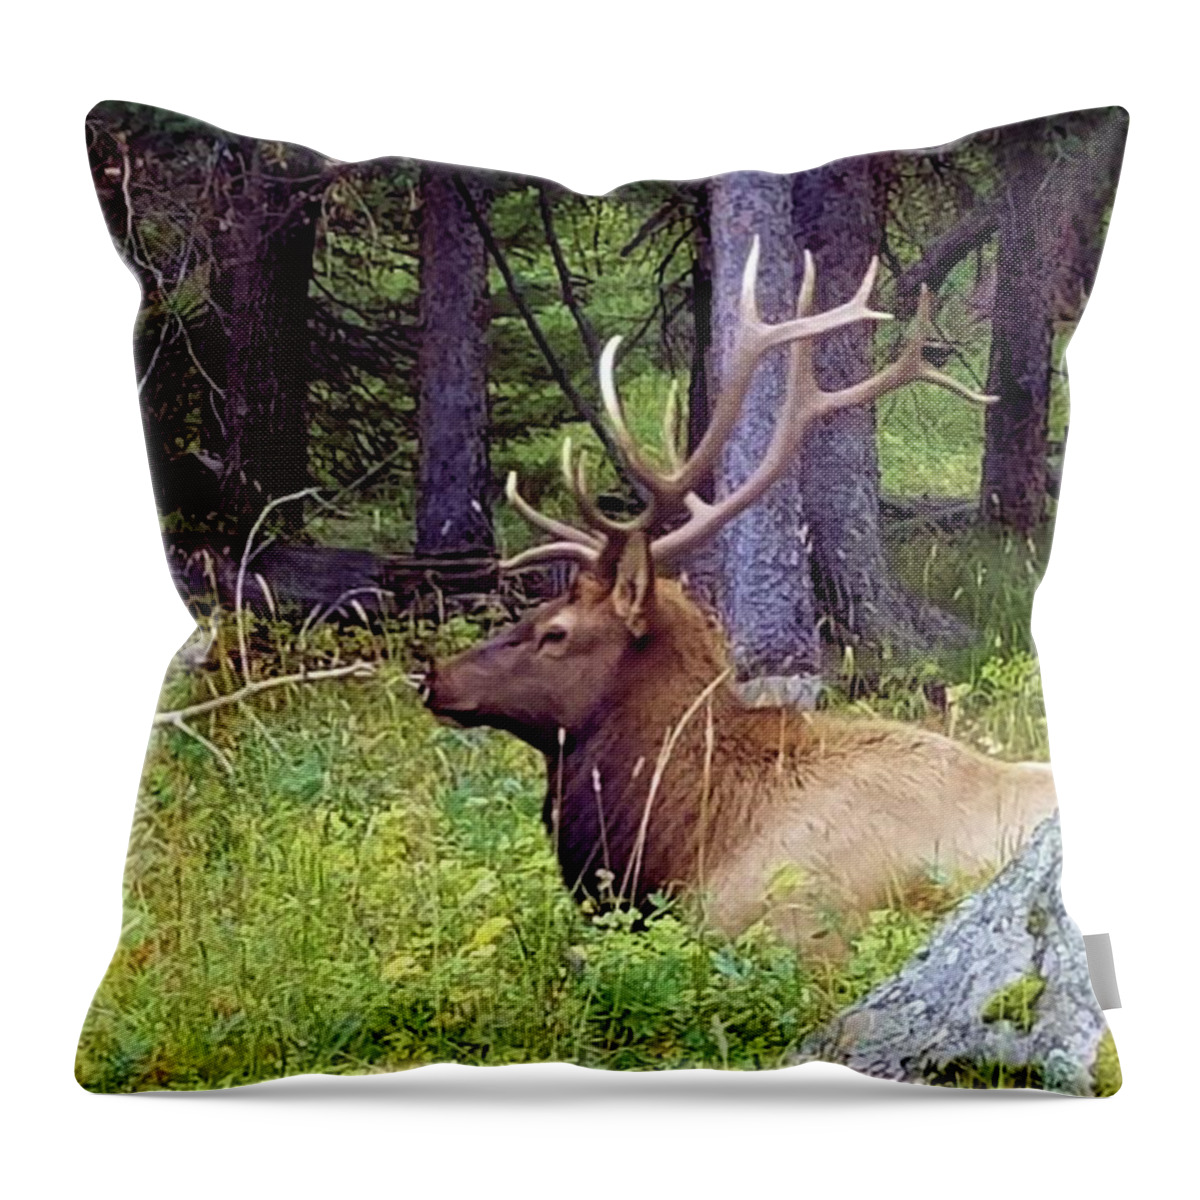  Throw Pillow featuring the photograph Elk I by Karen Stansberry